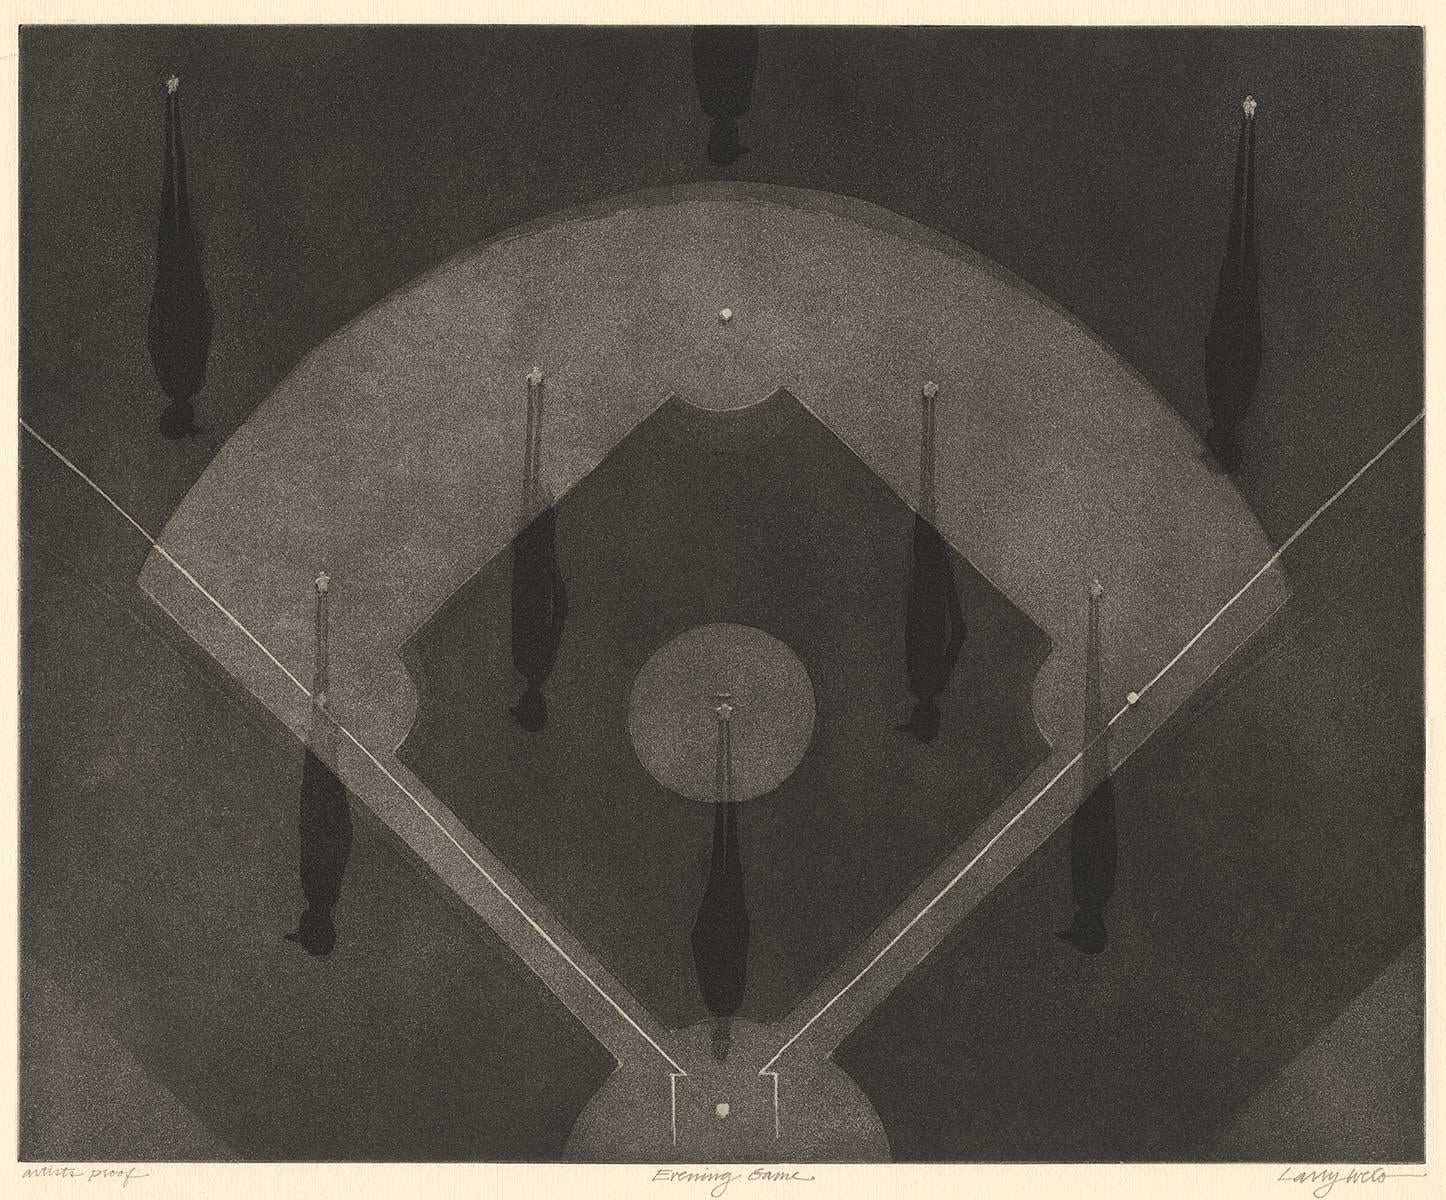 Larry Welo Landscape Print - Evening Game (aerial view of night baseball game with players casting shadows)